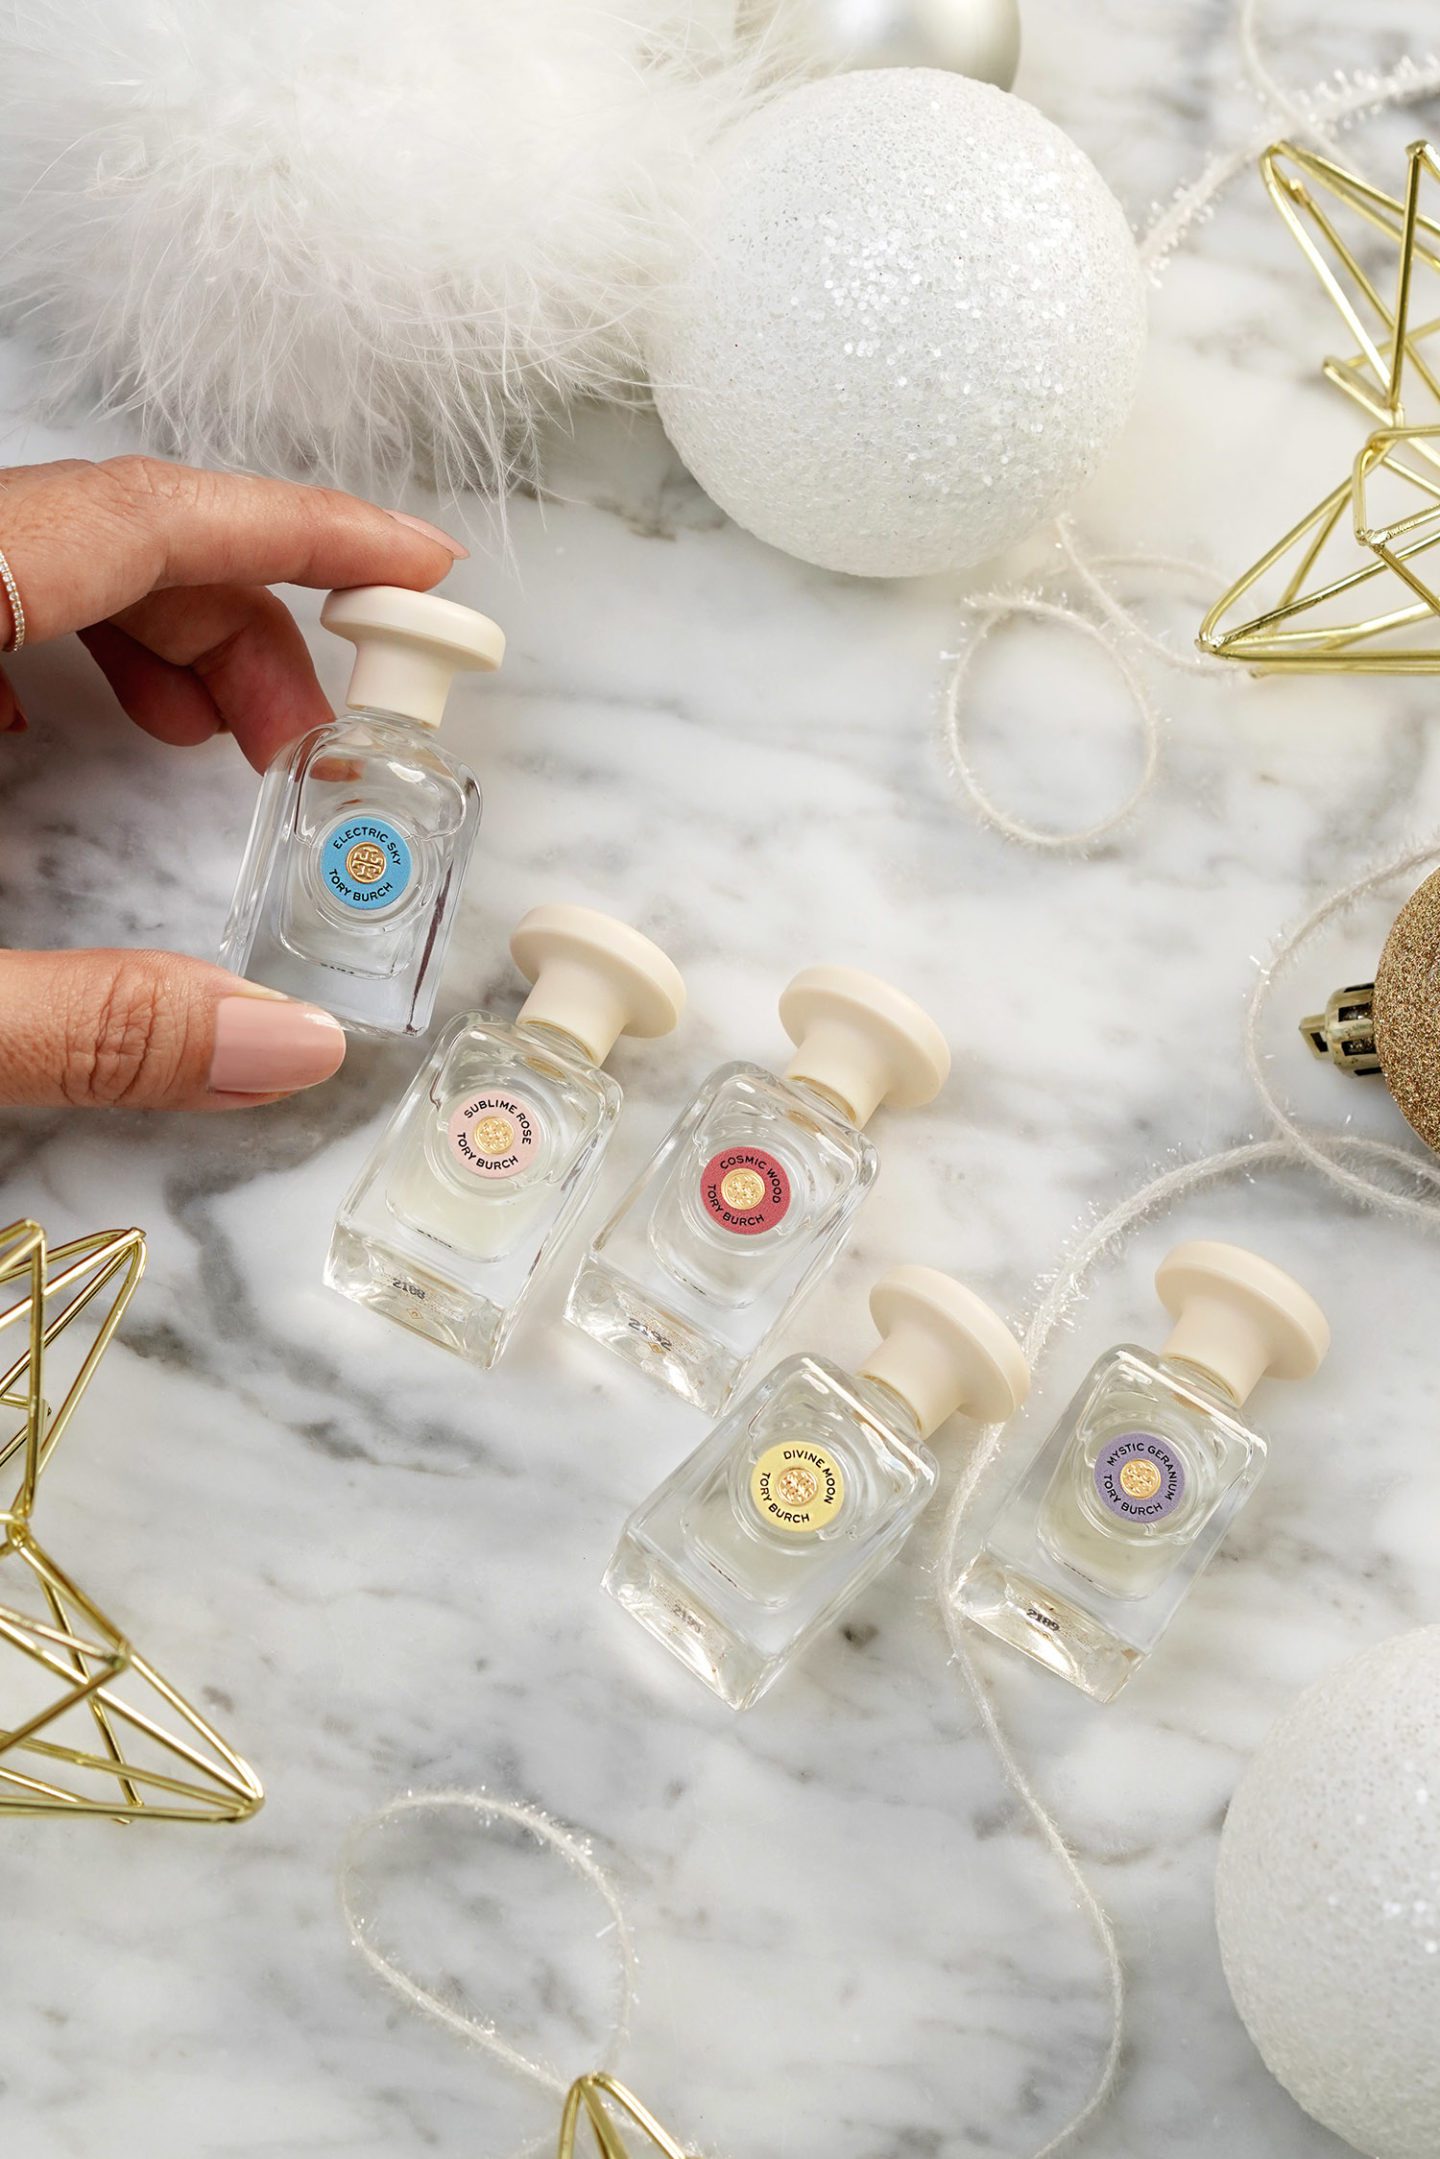 Tory Burch Essence of Dreams Discovery Set